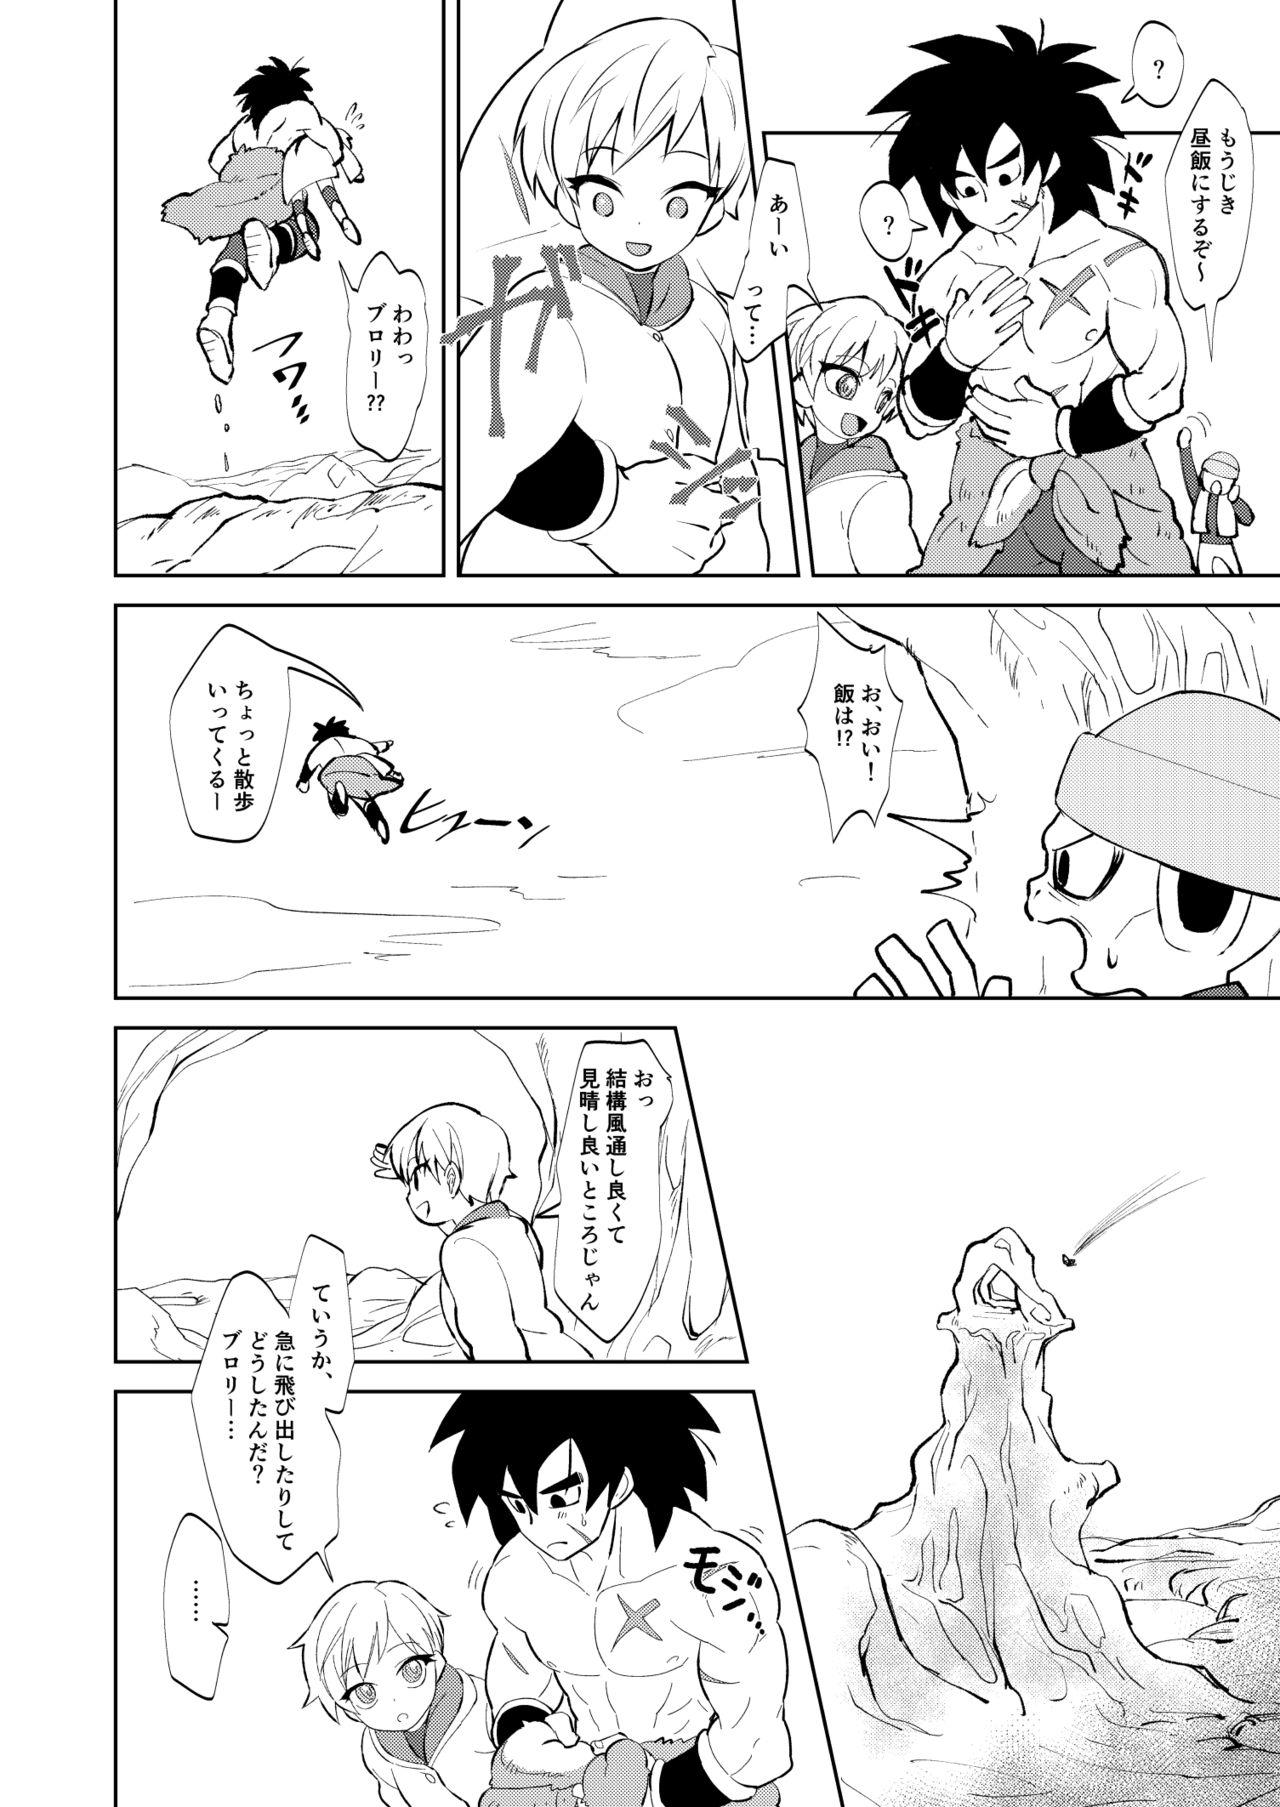 Brunette Broly x Cheelai Omake - Dragon ball super Riding - Page 4